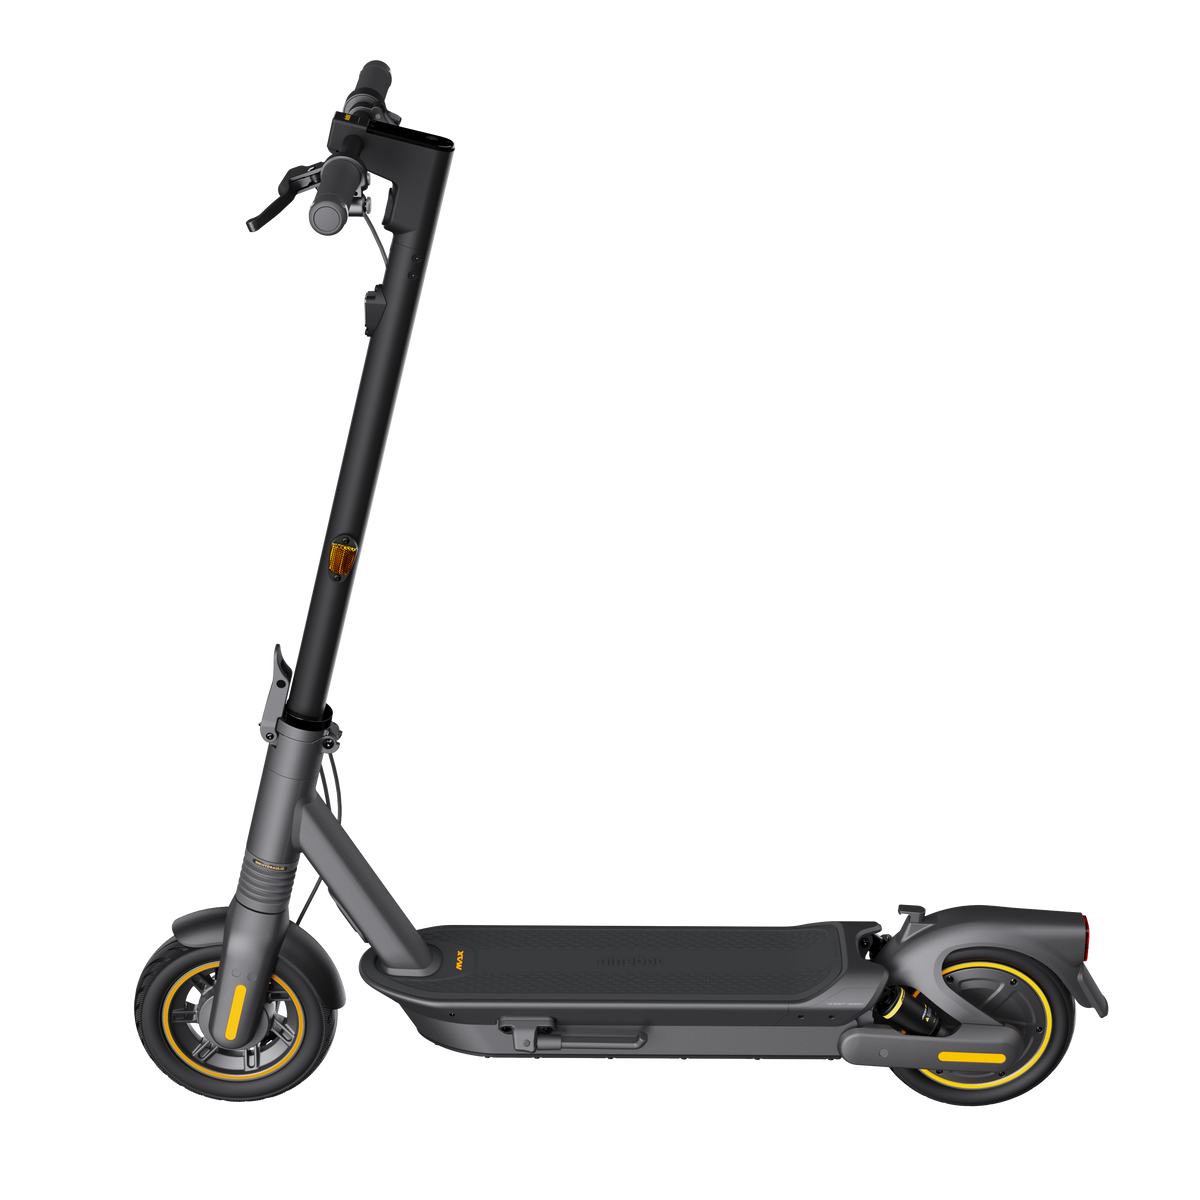 Segway Ninebot Max G2 Suspension Is This Scooter Worth The Hype #segways  #ninebotmax #dualtron 